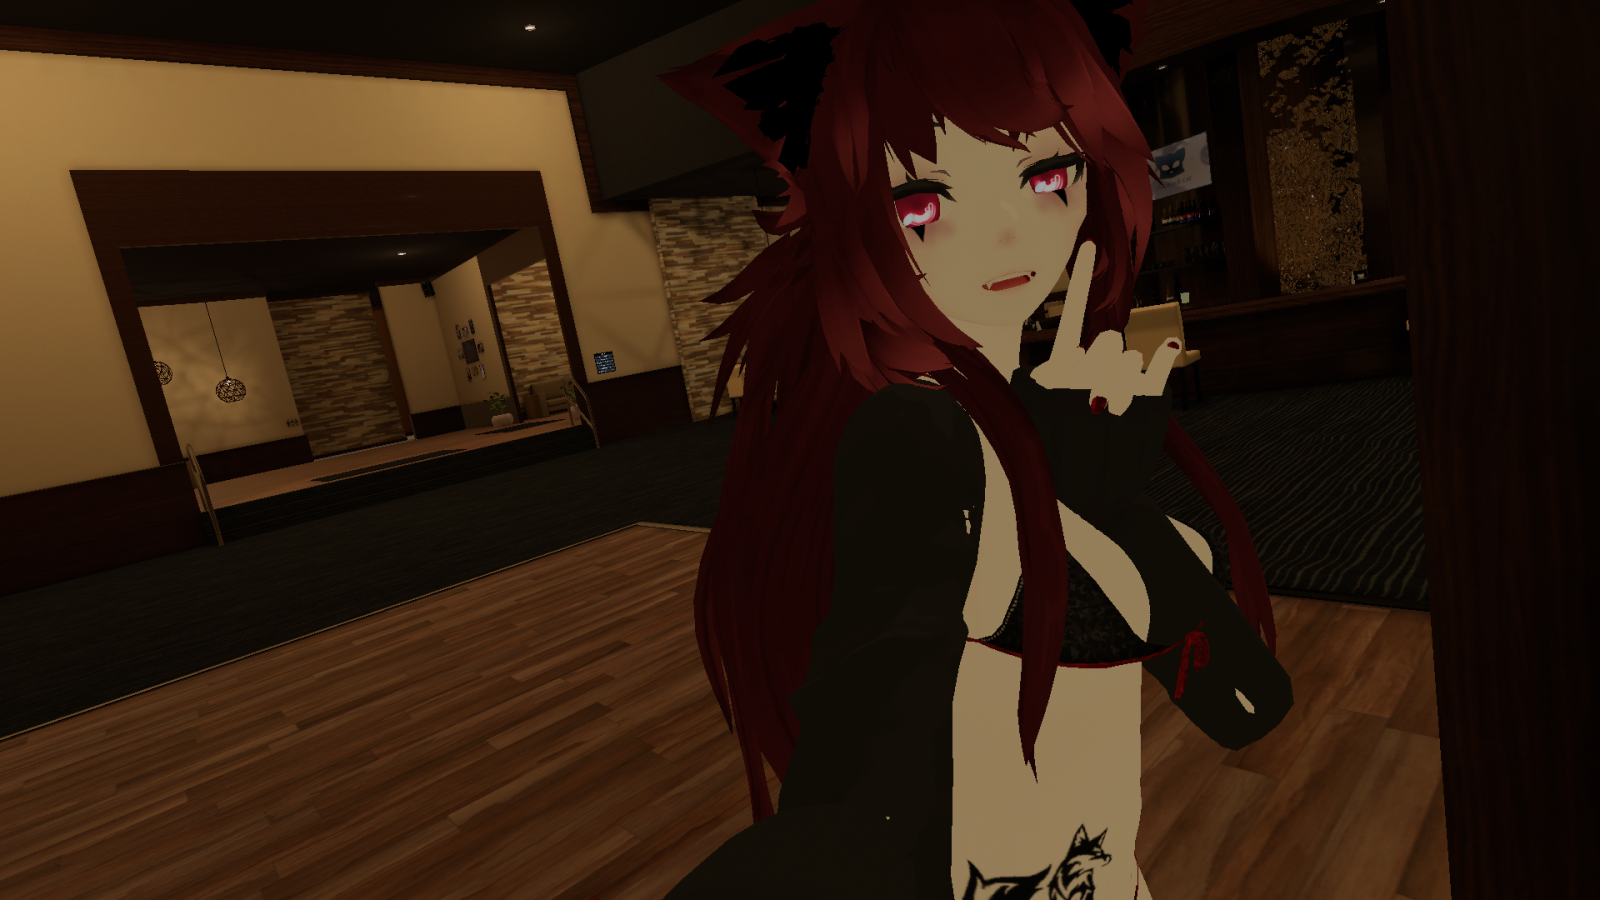 VRChat_1920x1080_2021-04-17_23-33-06.567.png